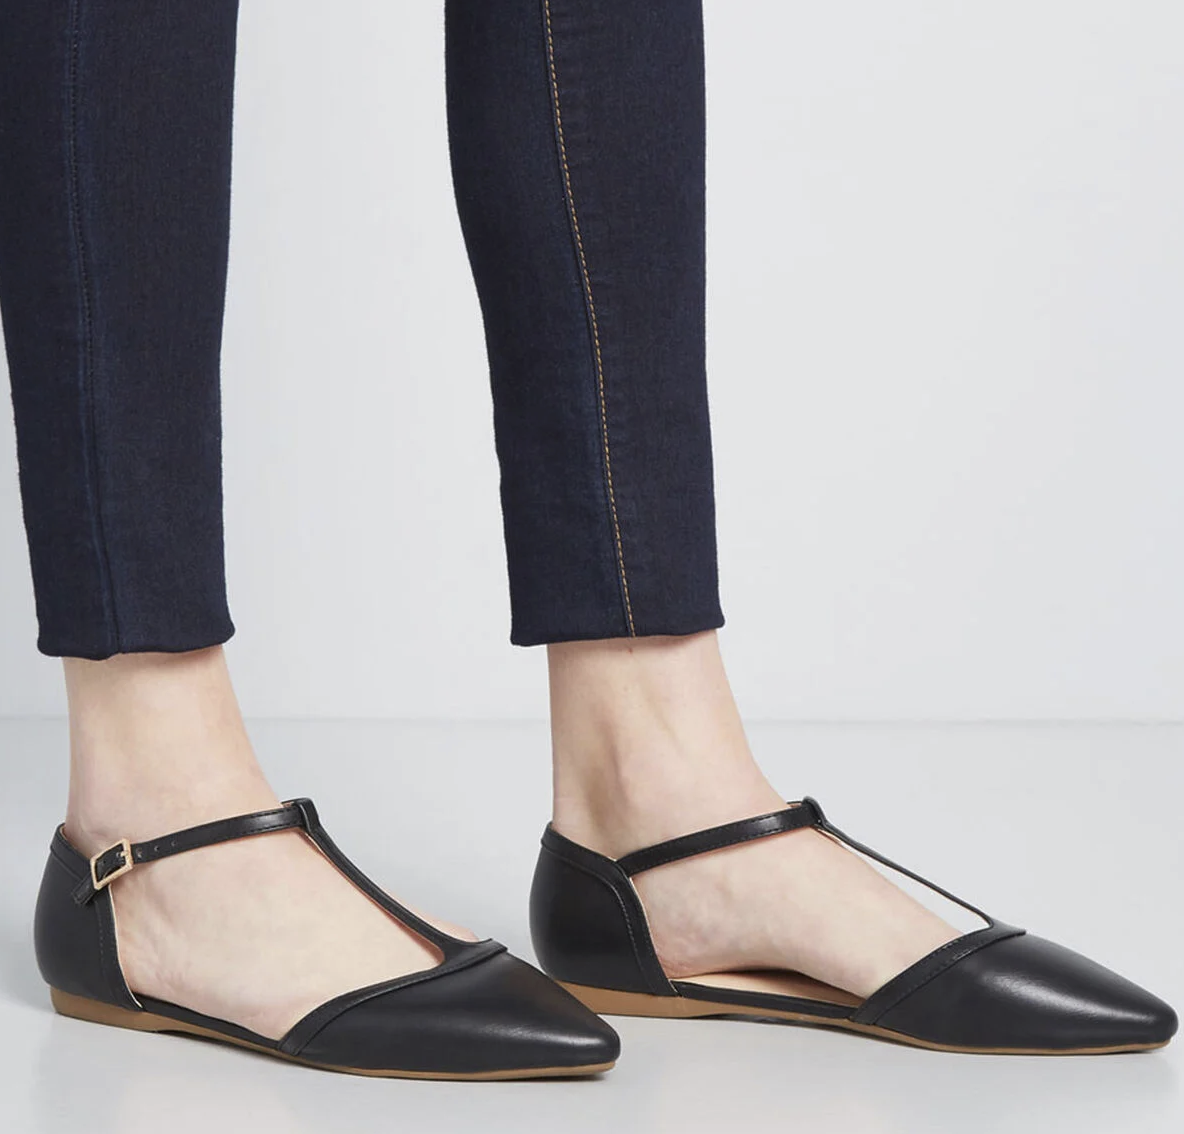 Fall Shoes Under $50 — Boots, Flats, And Slippers